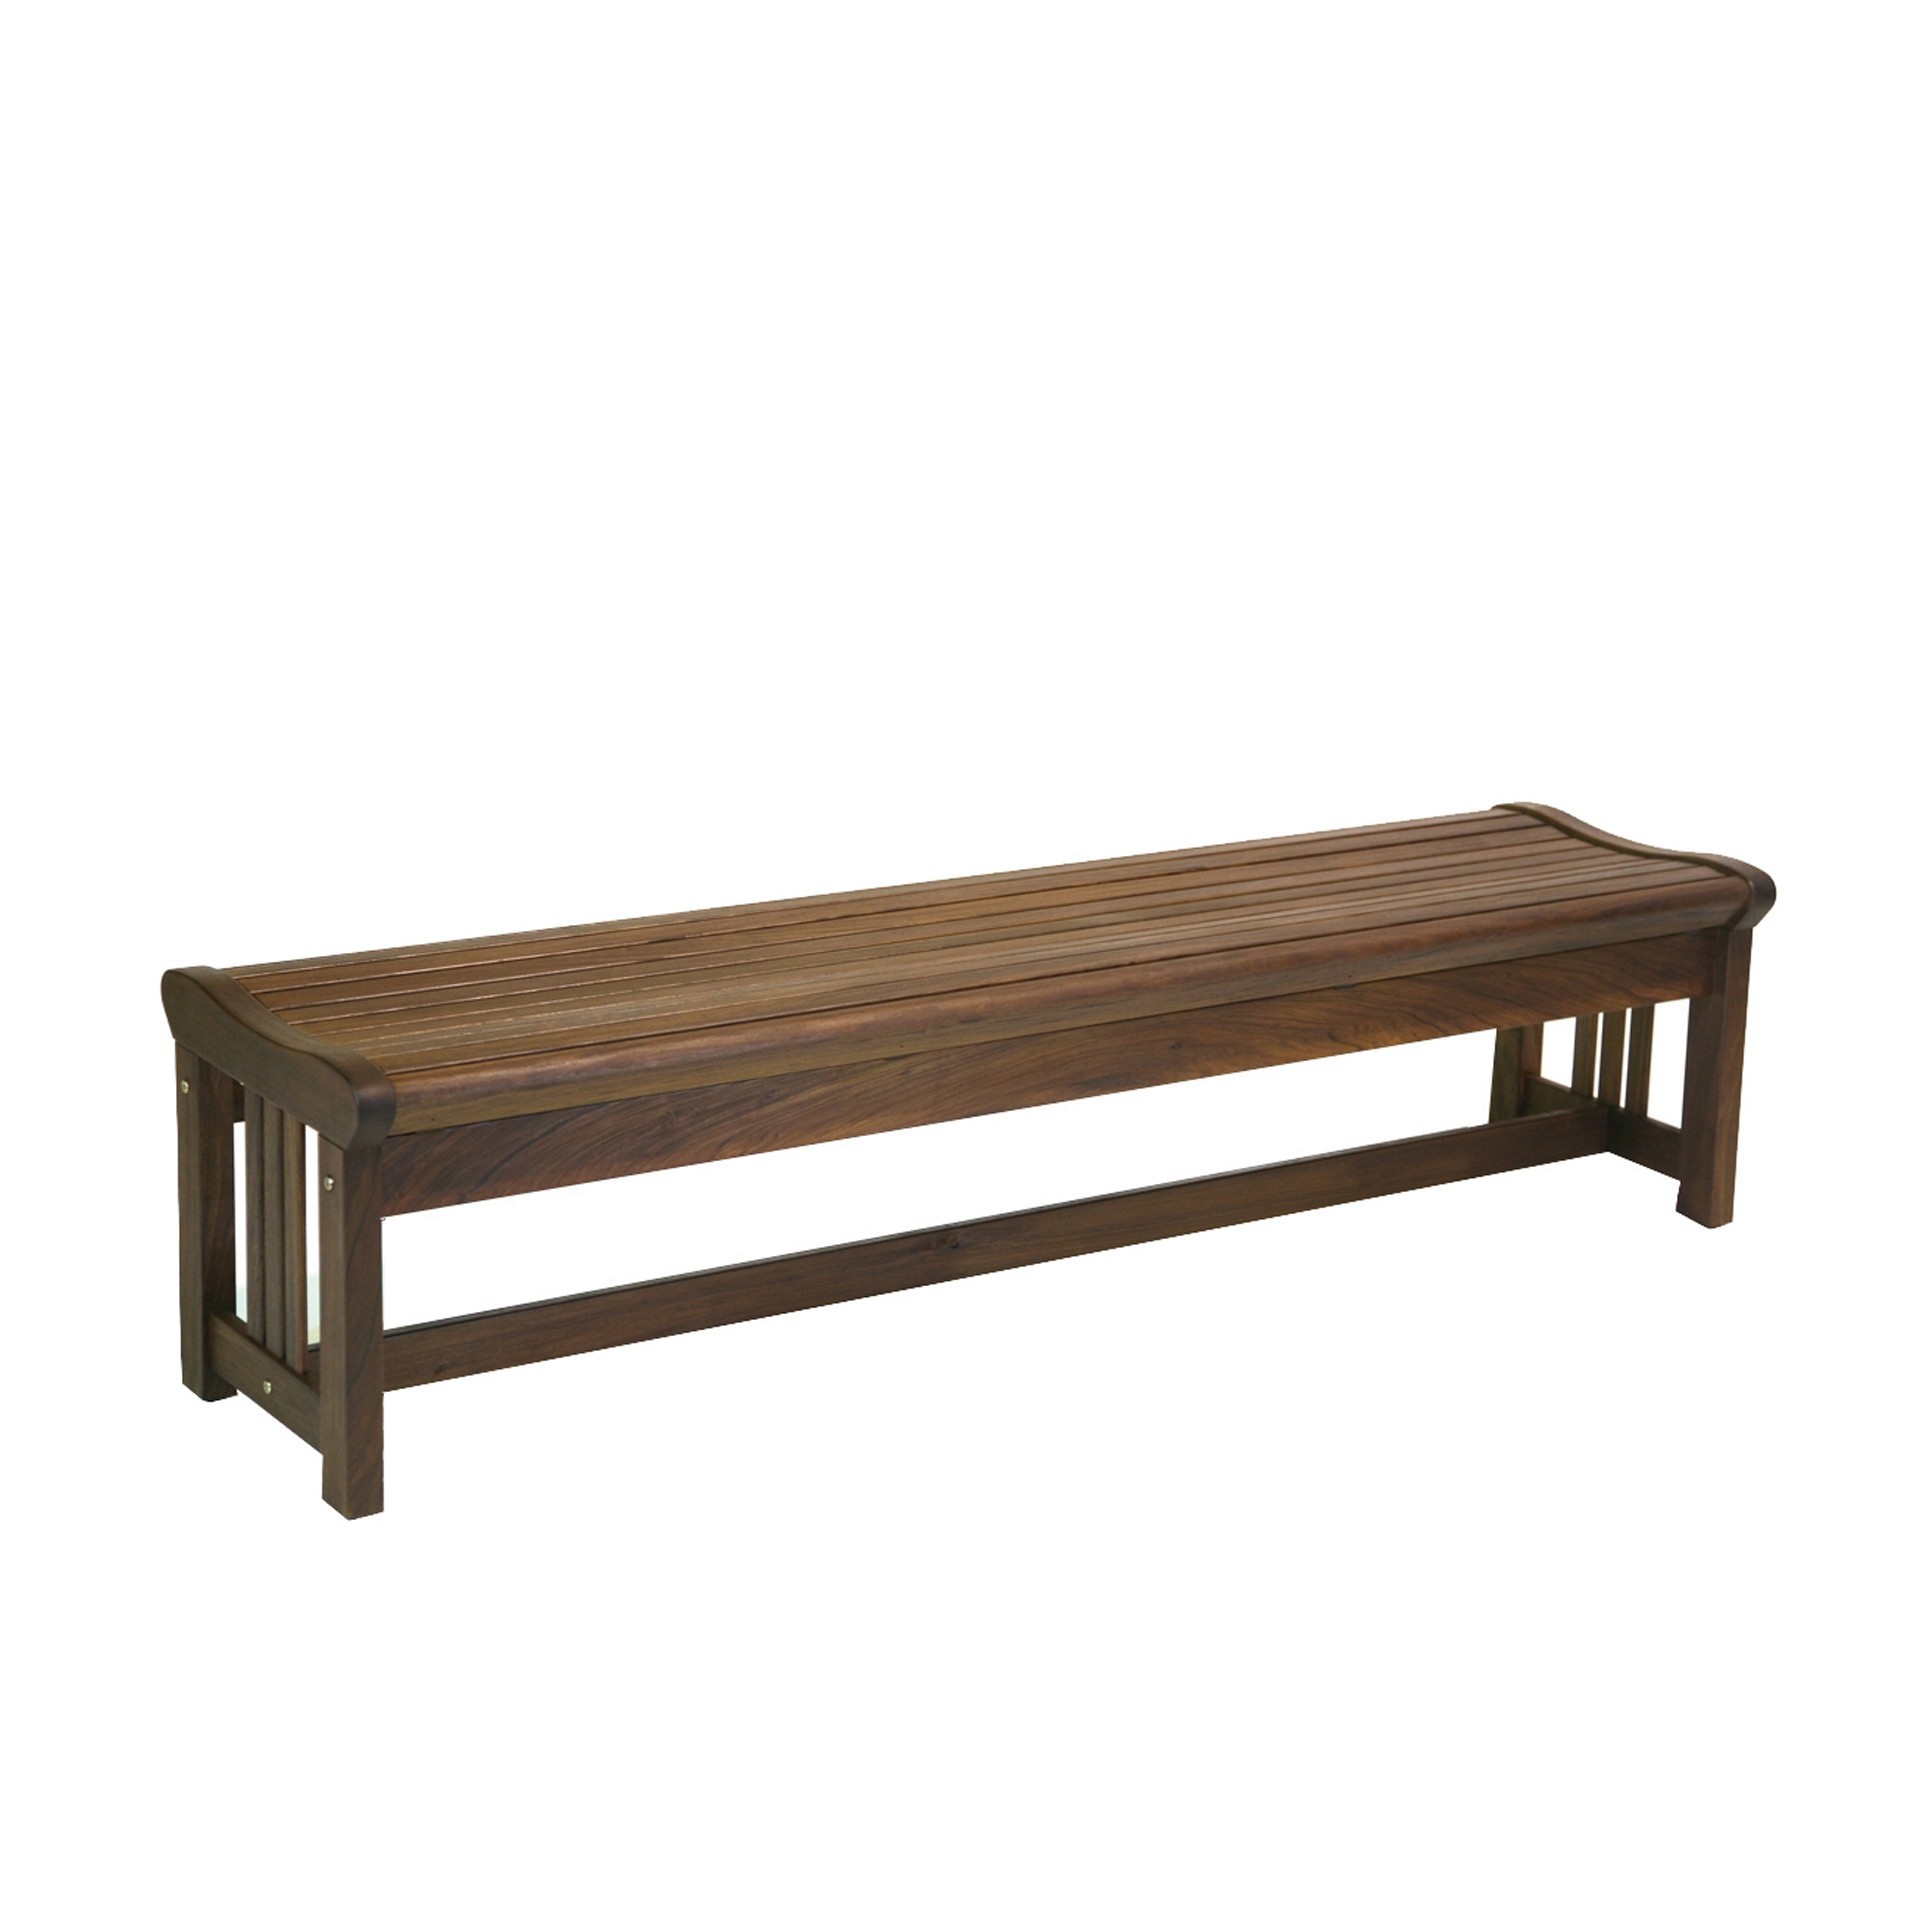 Lincoln backless bench from hausers patio luxury outdoor living by hausers patio